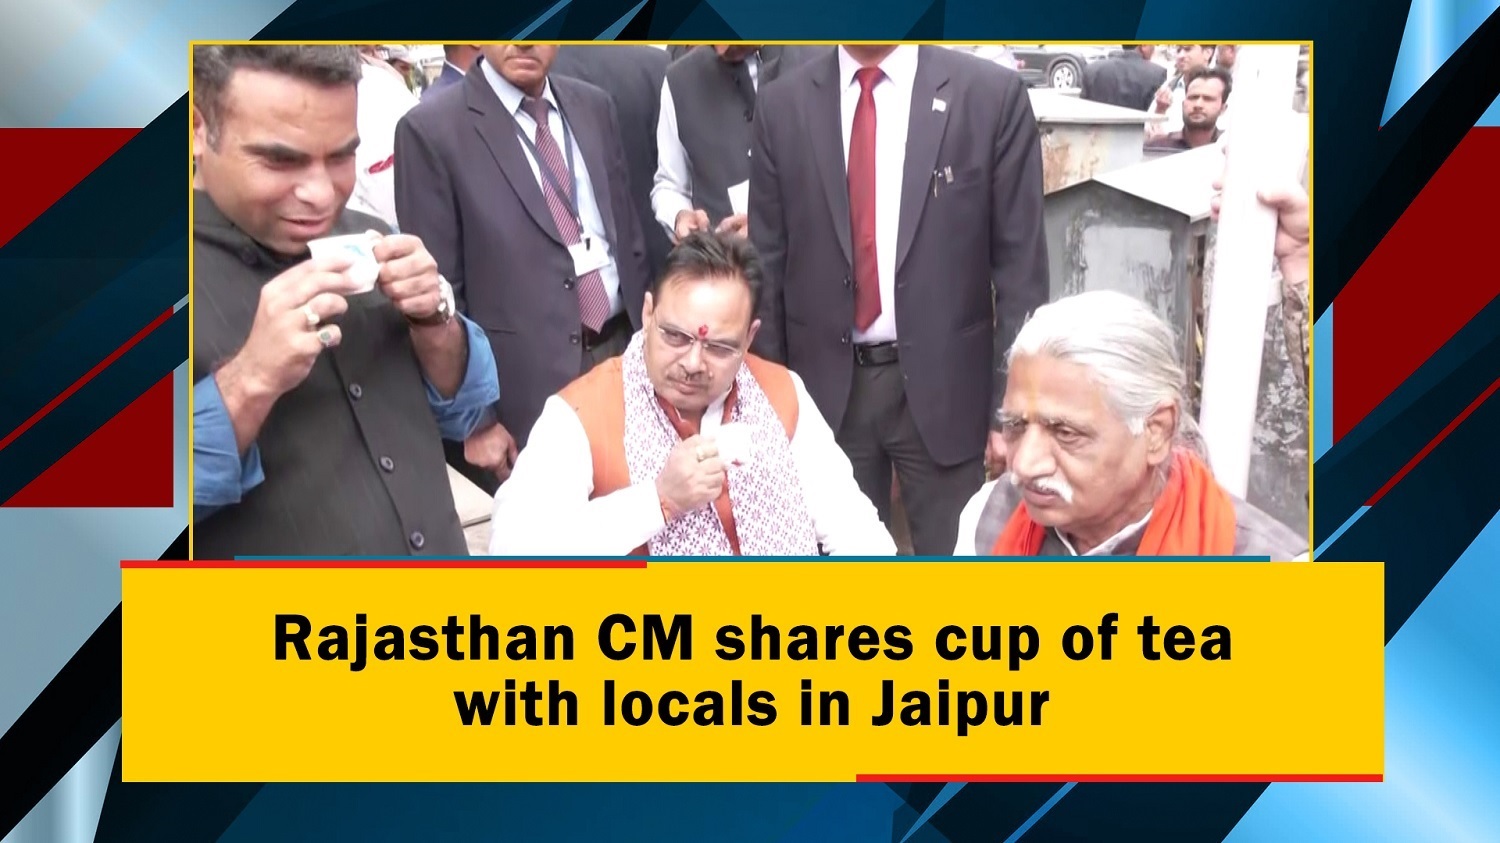 Rajasthan CM shares cup of tea with locals in Jaipur